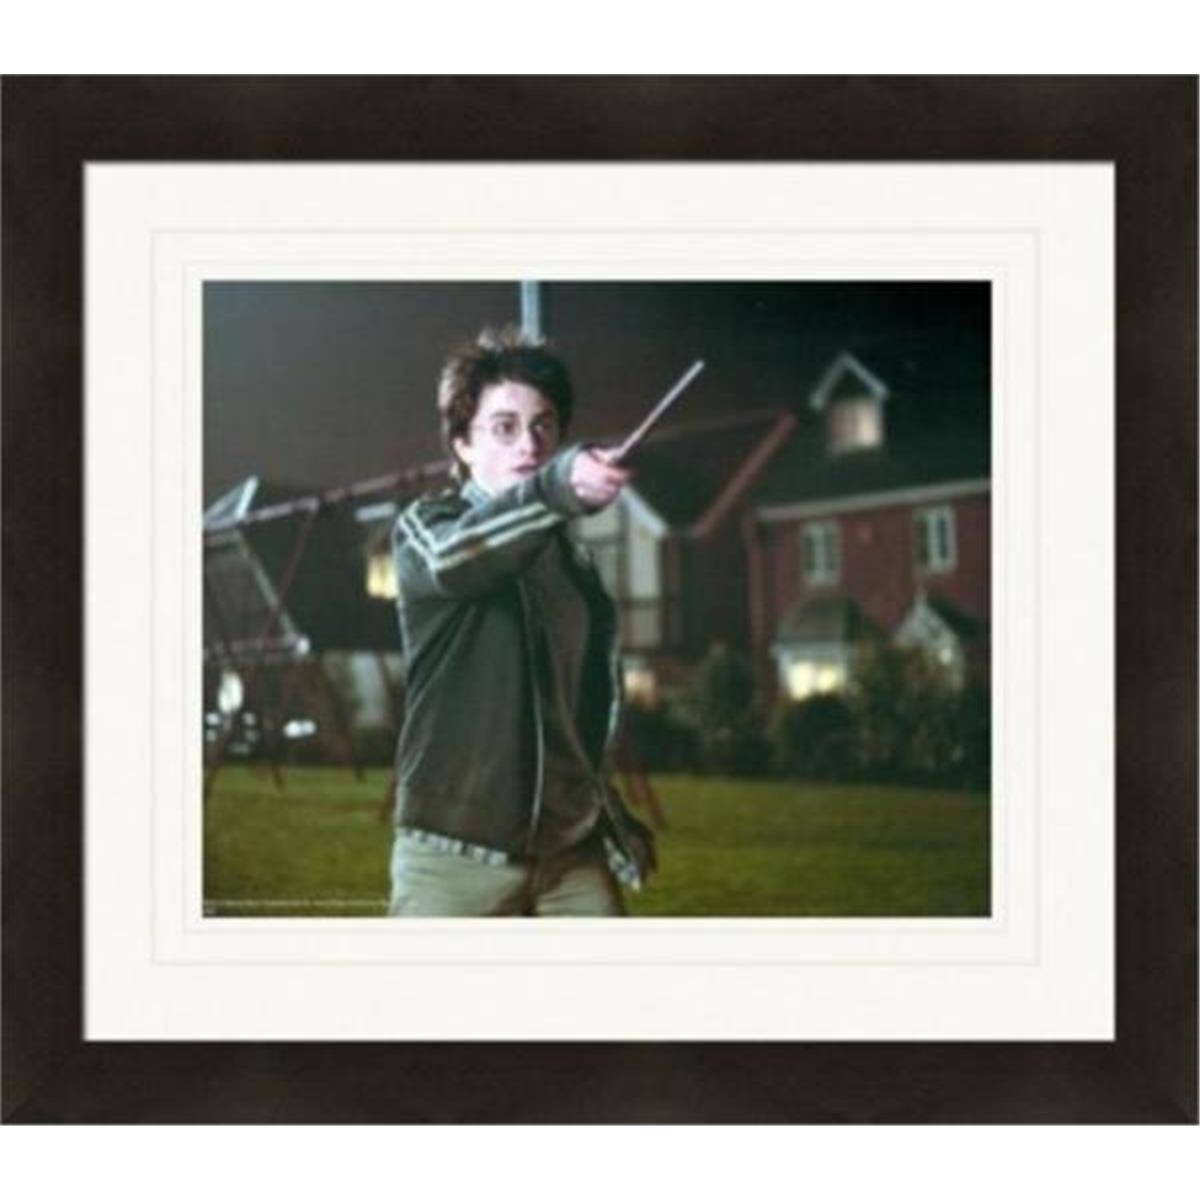 443762 8 x 10 in. Harry Potter Photo Daniel Radcliffe No. 7 Matted & Framed -  Autograph Warehouse